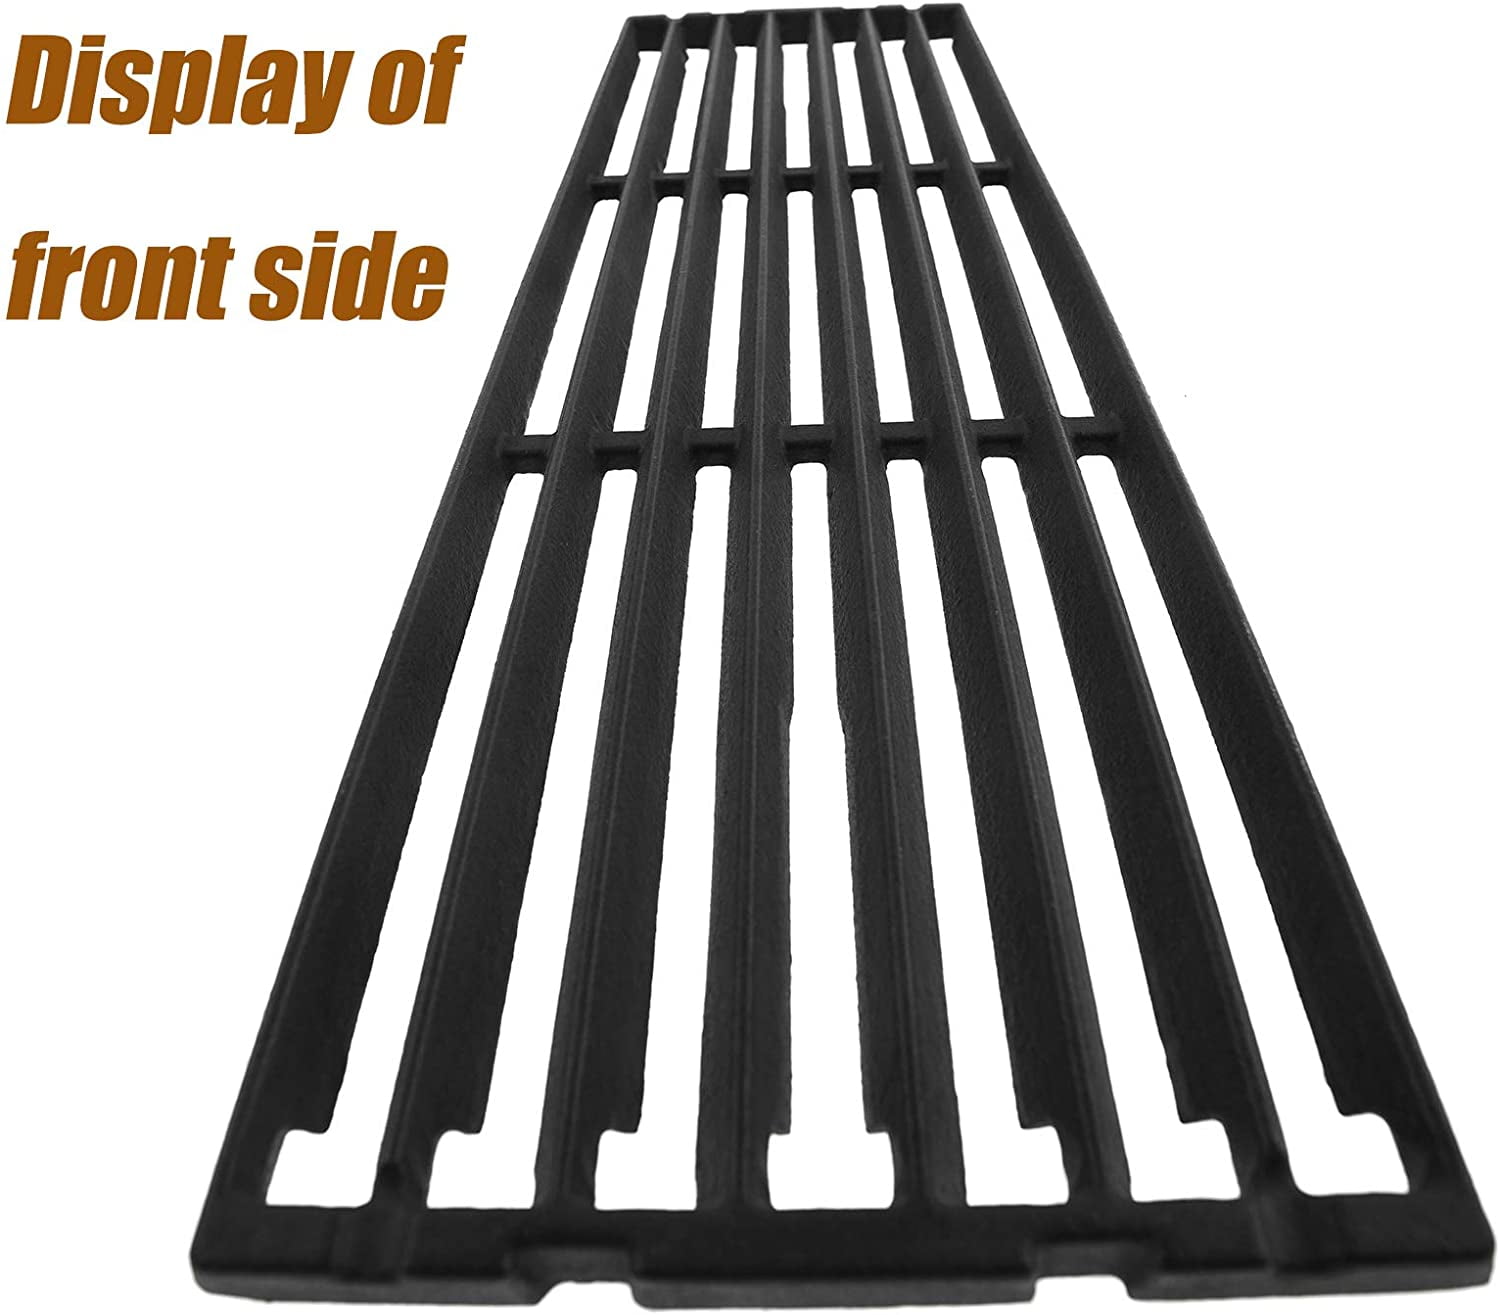 490 Broil King 9571-44 19 1/8 Cooking Grid Grates for Broil King Regal 420 9585-87 9765-57 Cast Iron 9776-47 9585-47 9776-44 9585-44 9765-54 9585-84 9571-47 440 9576-44R 9576-47R 